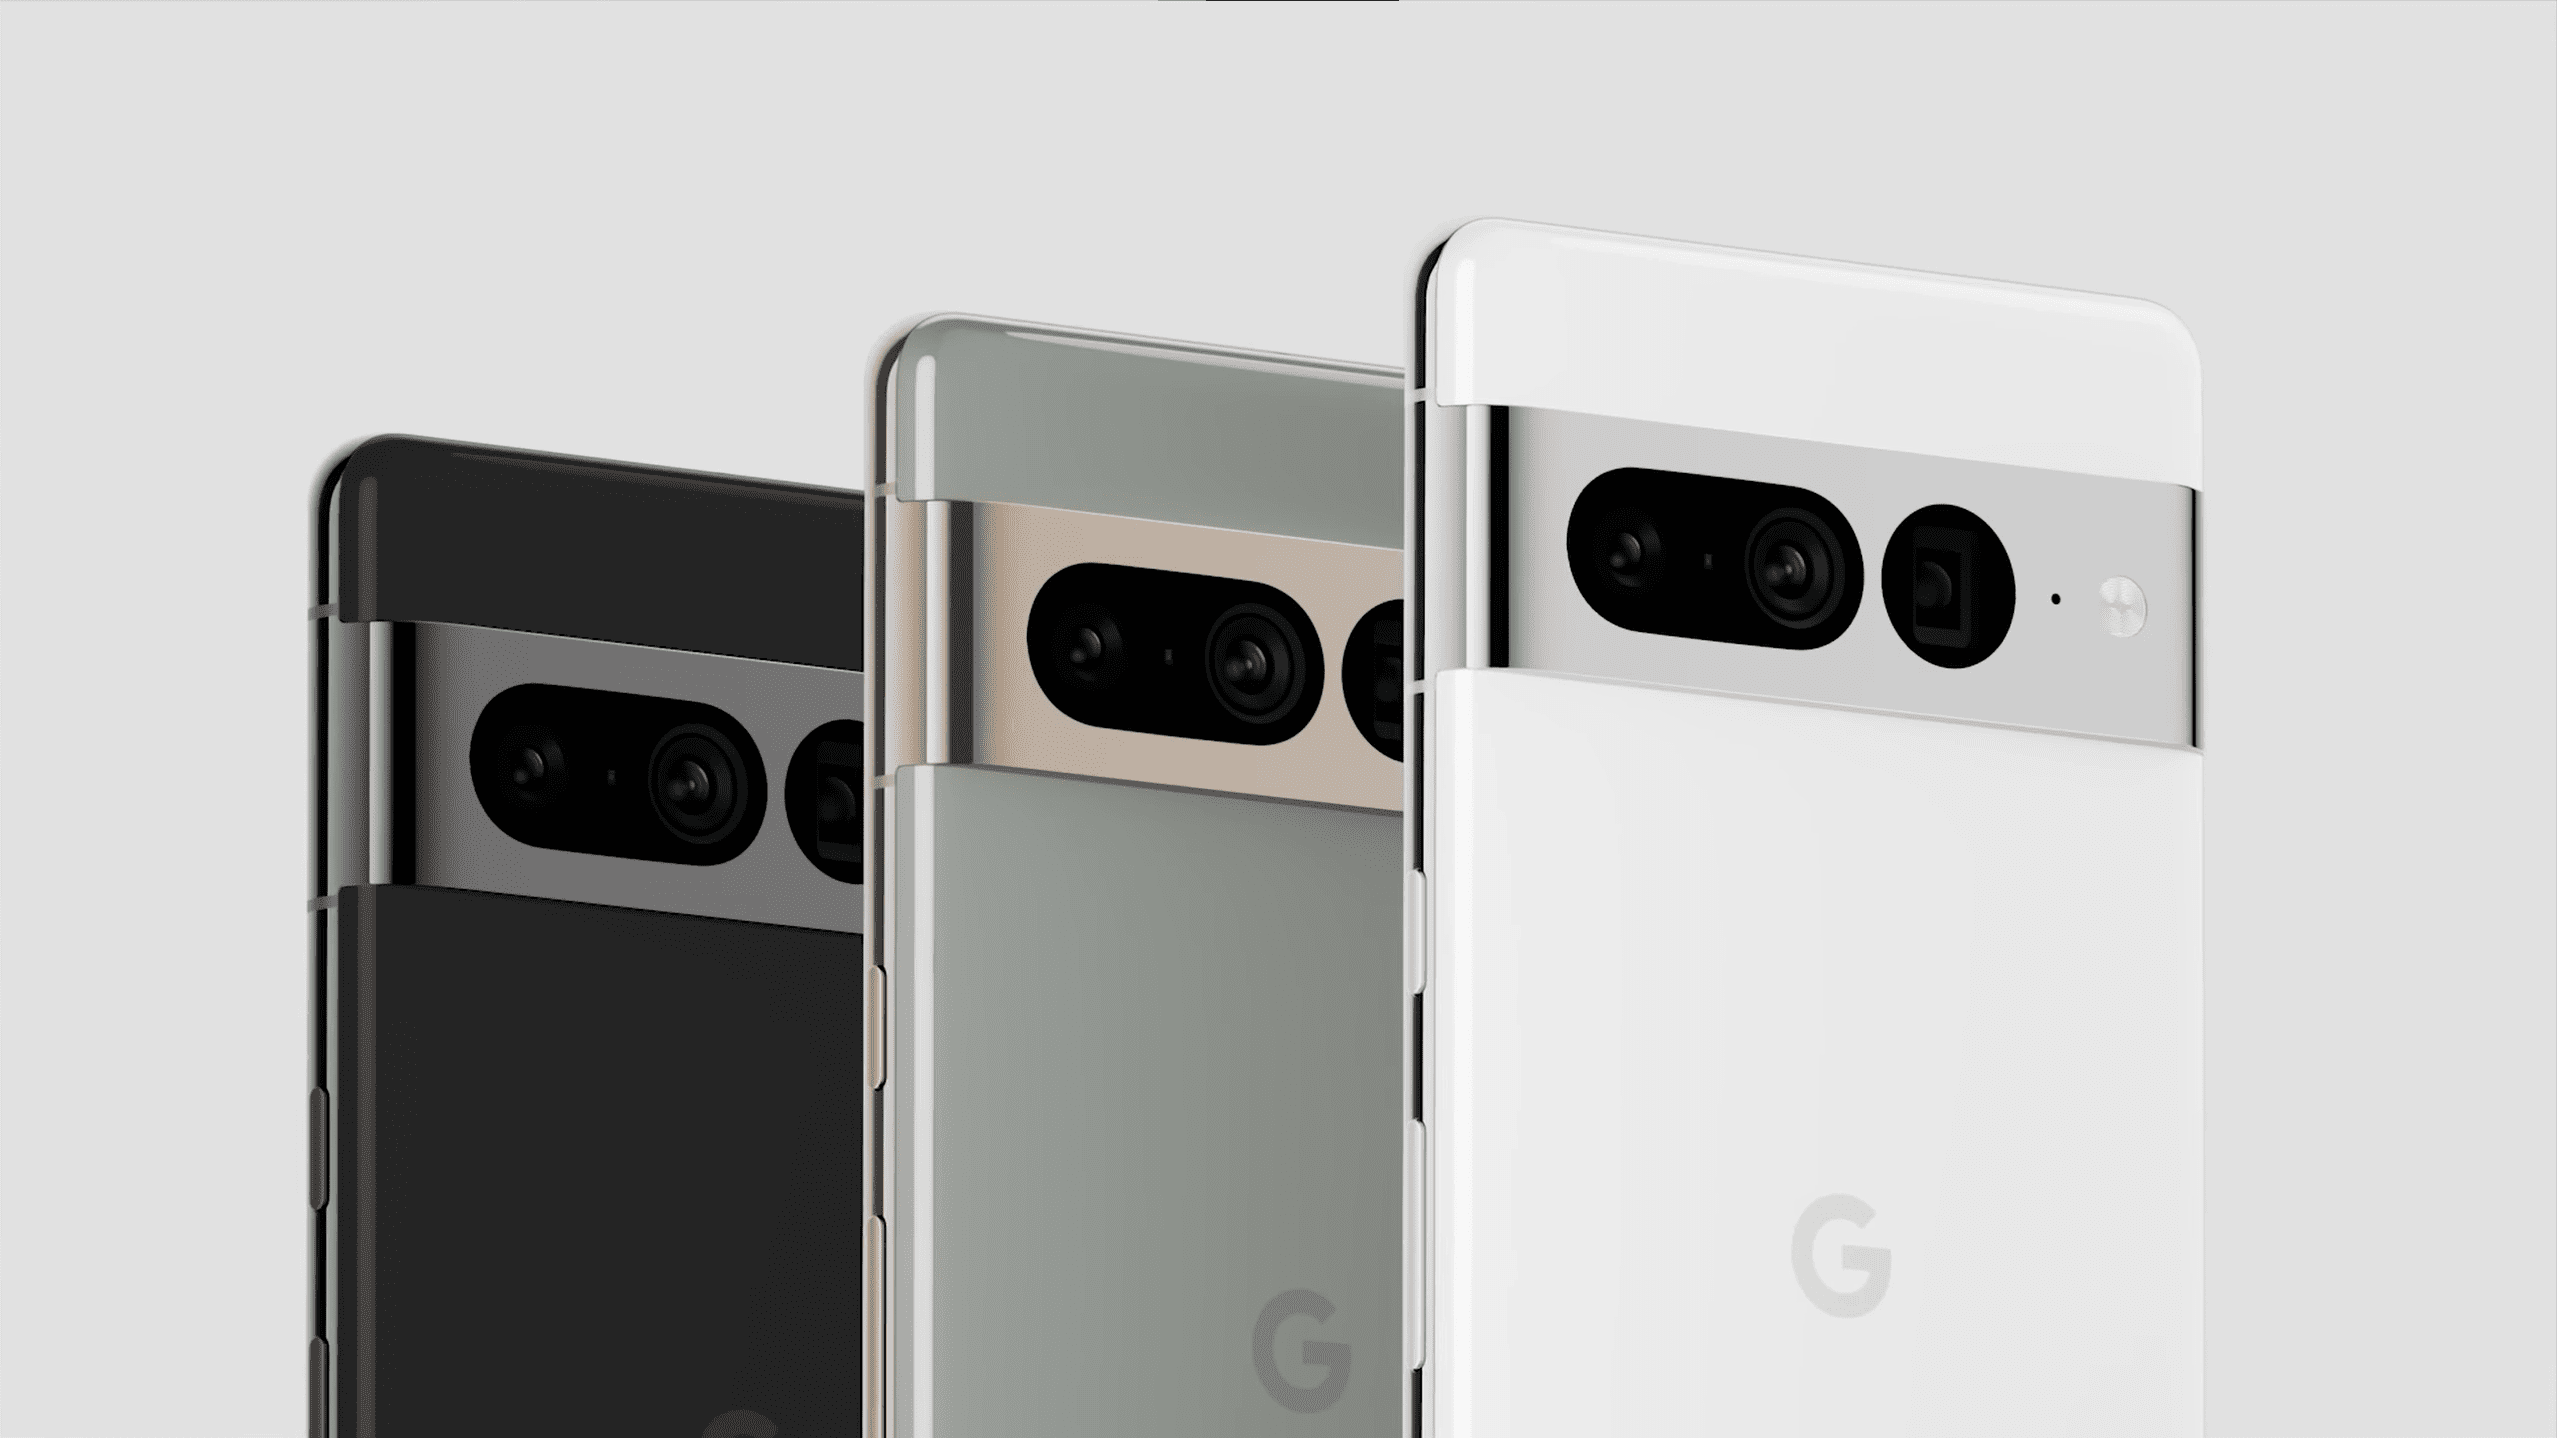 Google Pixel 7 Pro official render, shown three times in black, white and green